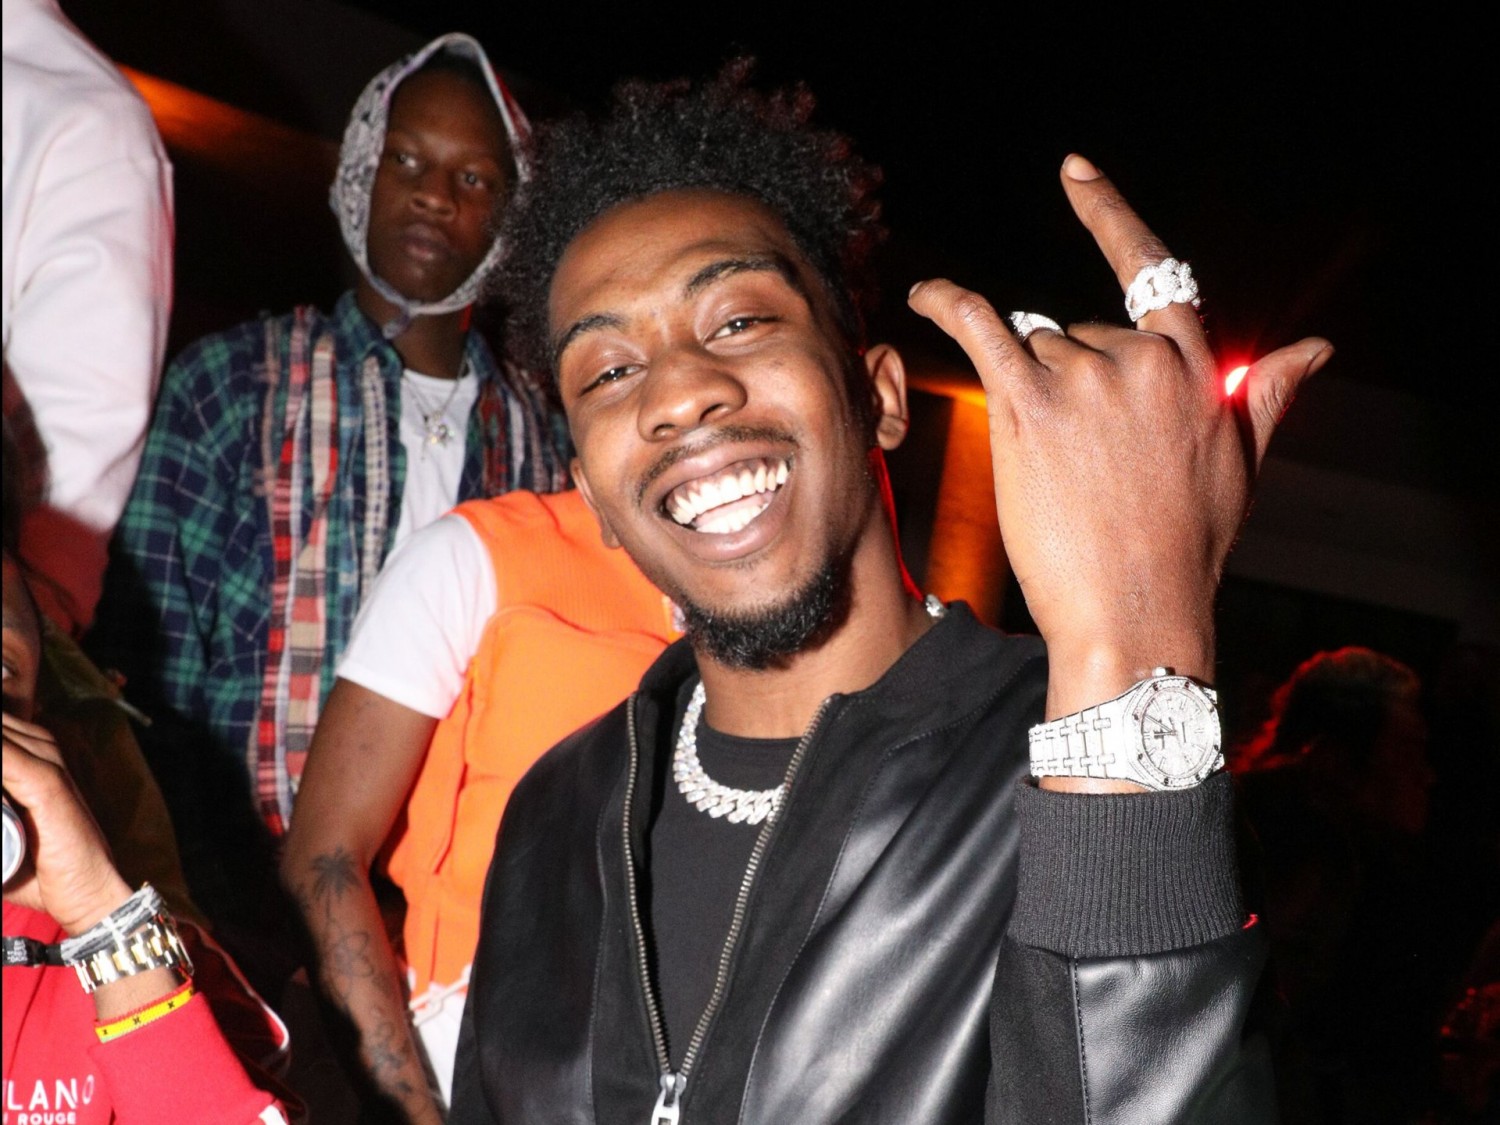 Desiigner's hit song "Panda" tipped off Genius that Google may be copying some of its lyrics. Courtesy of BFA